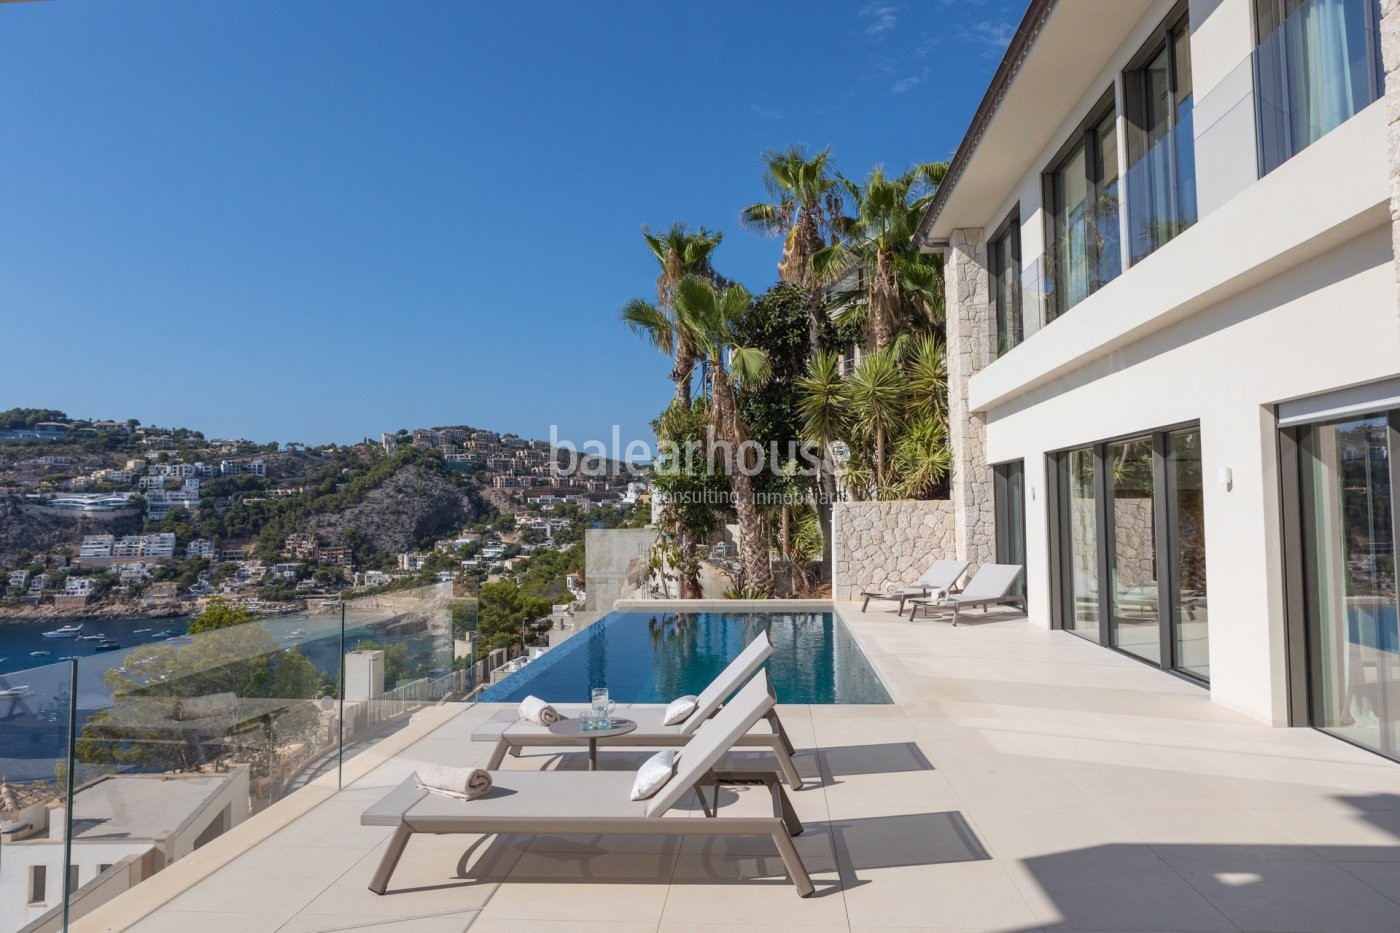 Breathtaking sea views from this new villa in a privileged location in Cala Llamp.